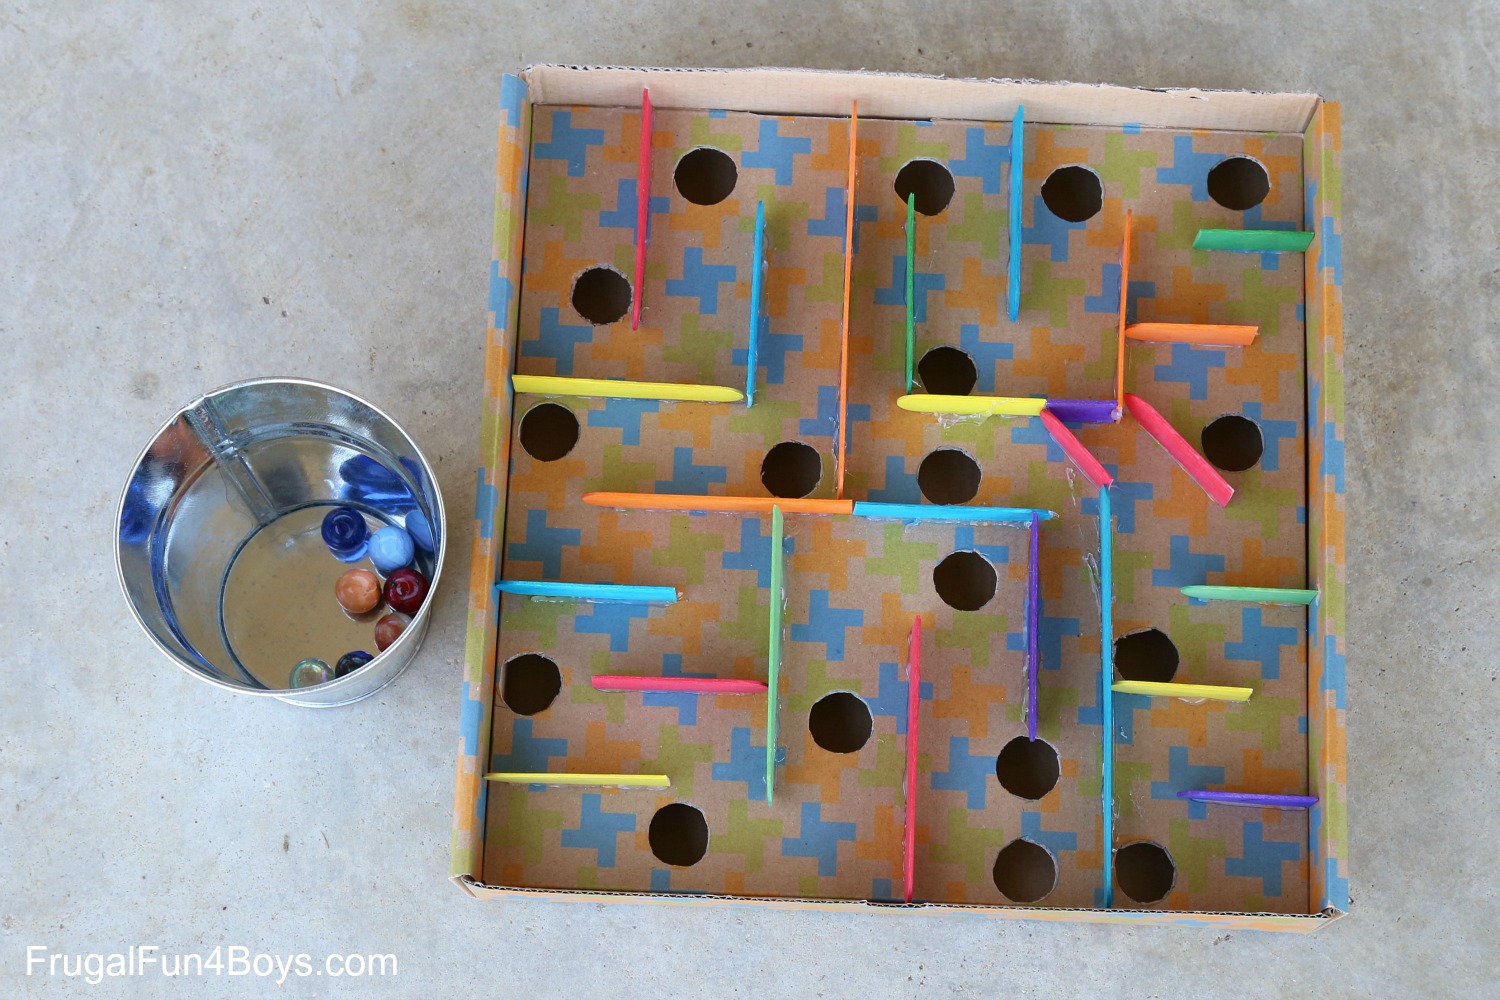 How to Make a Cardboard Box Marble Labyrinth Game Frugal Fun For Boys and Girls